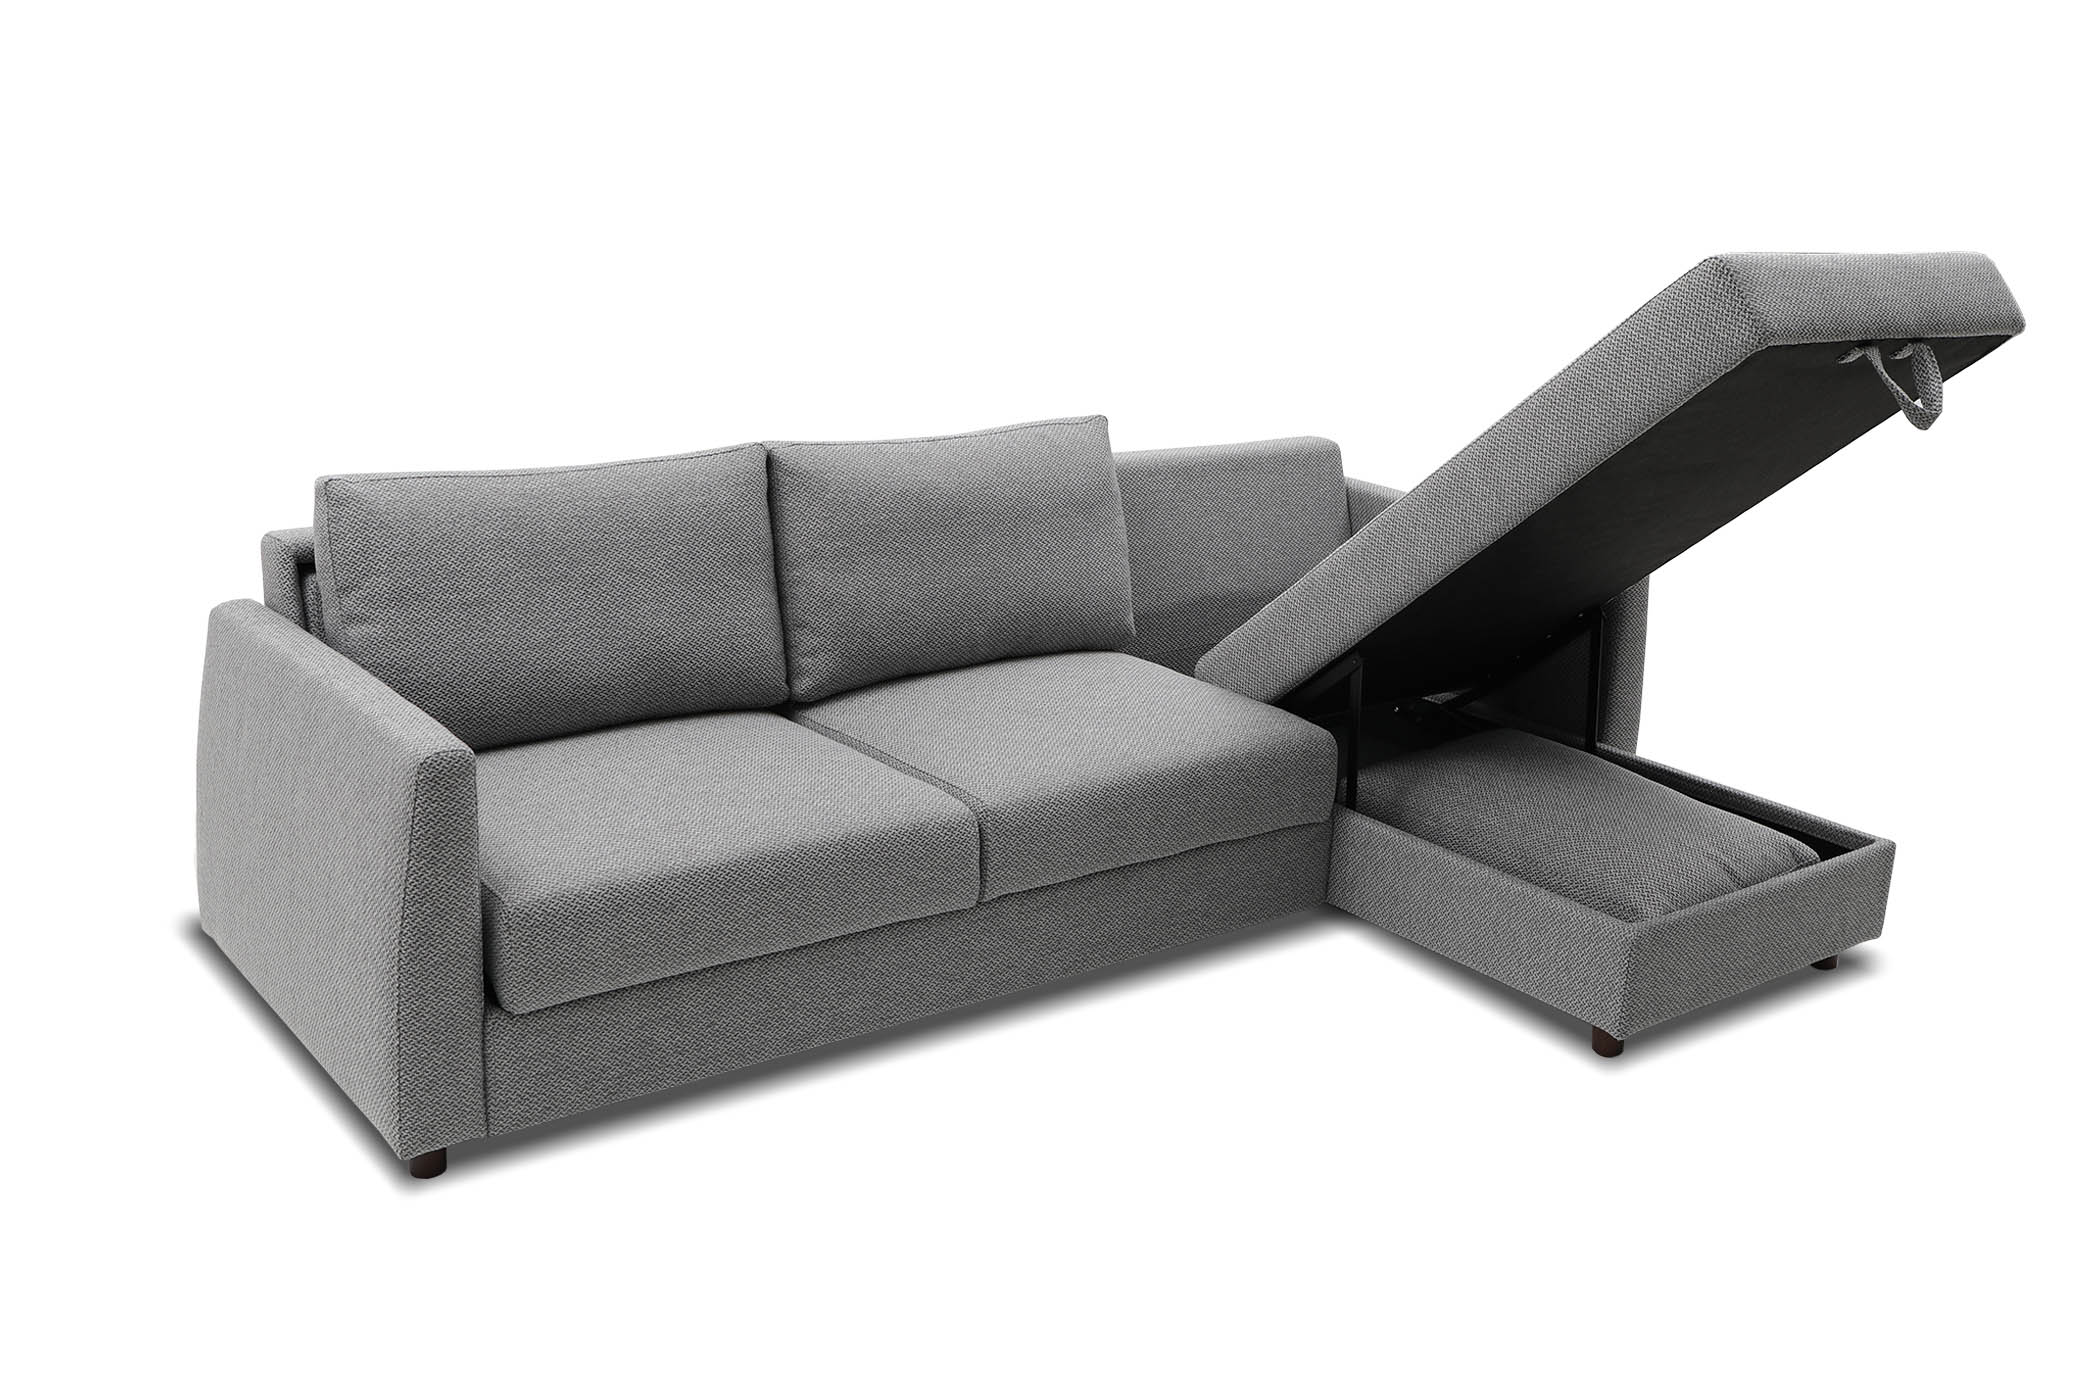 Bergen Reversible Sectional Sofa Bed With Storage